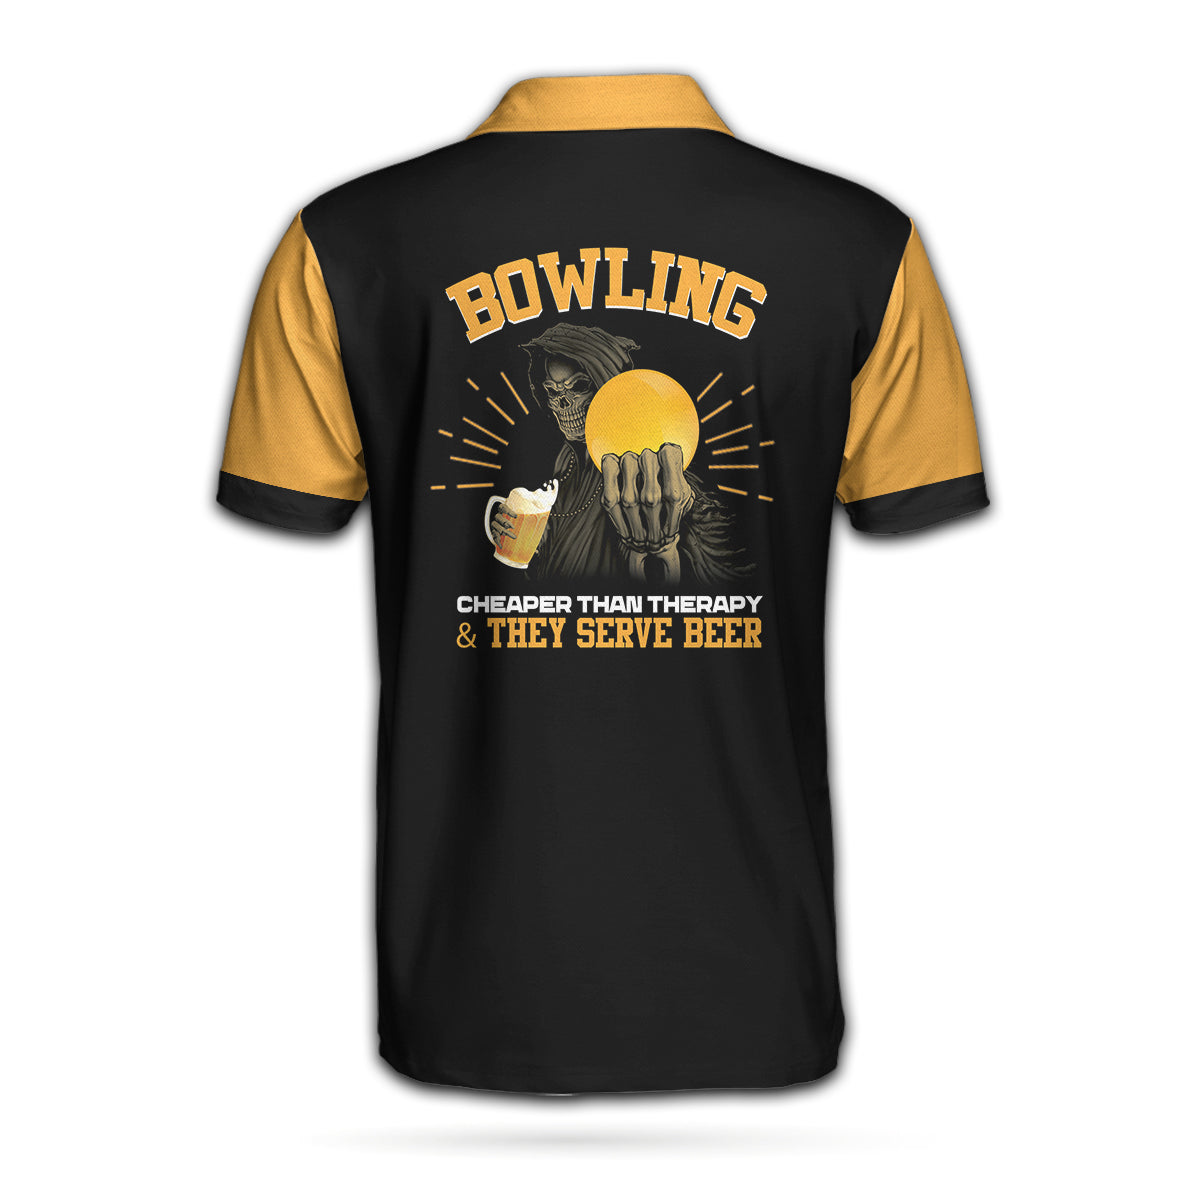 Bowling Therapy Polo Shirt/ Funny Bowling Polo Shirt With Sayings/ Bowling Gift Idea For Male Bowlers Coolspod